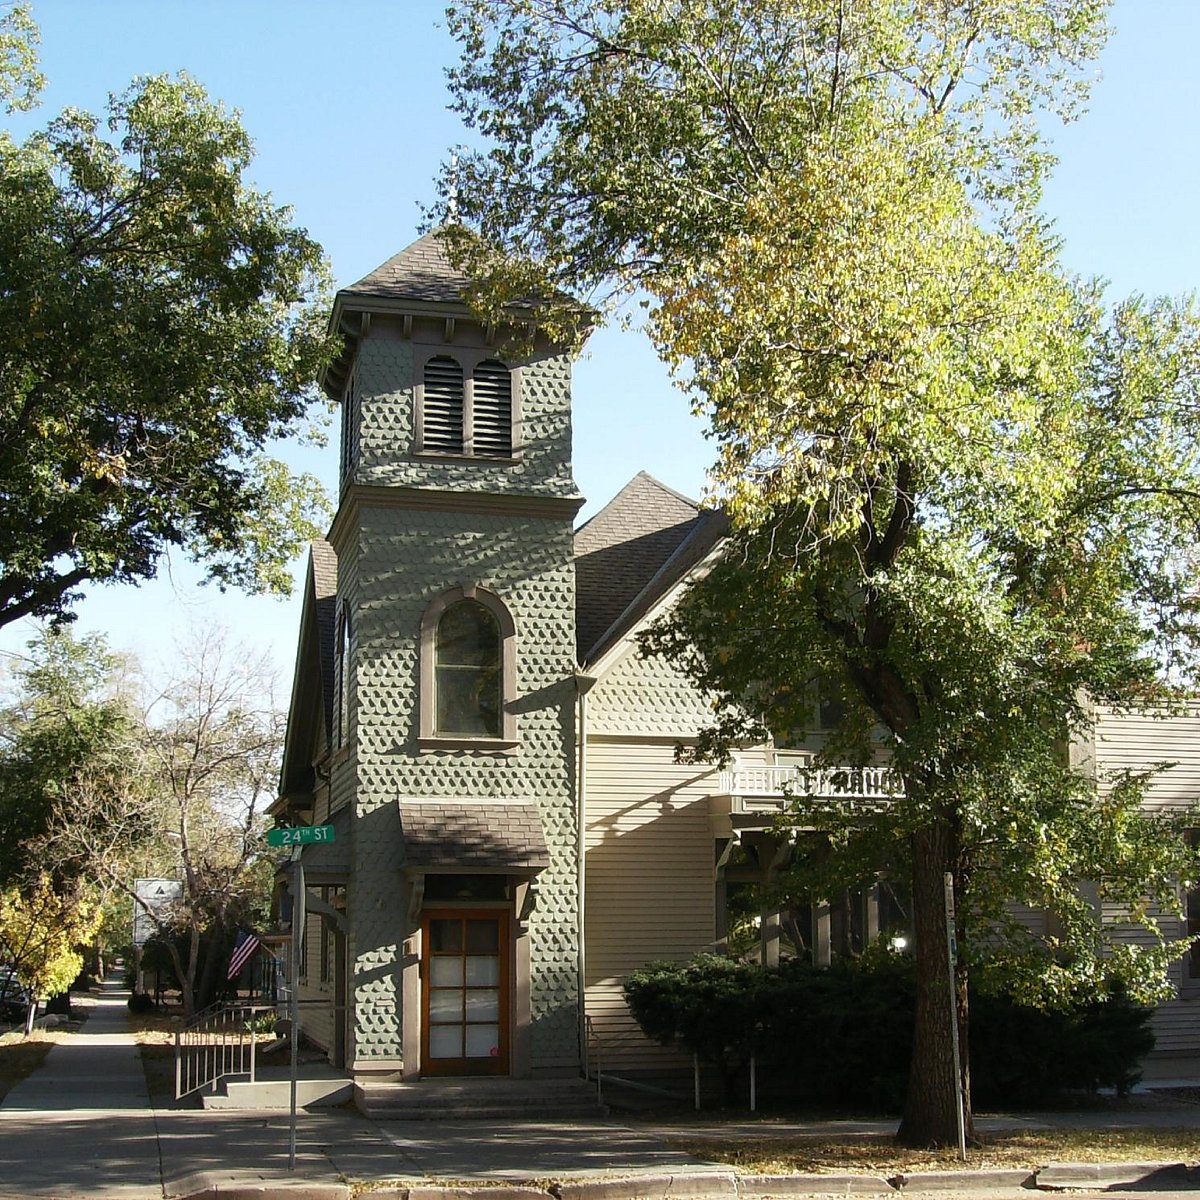 Grapevine Heritage Center and Historical Museum